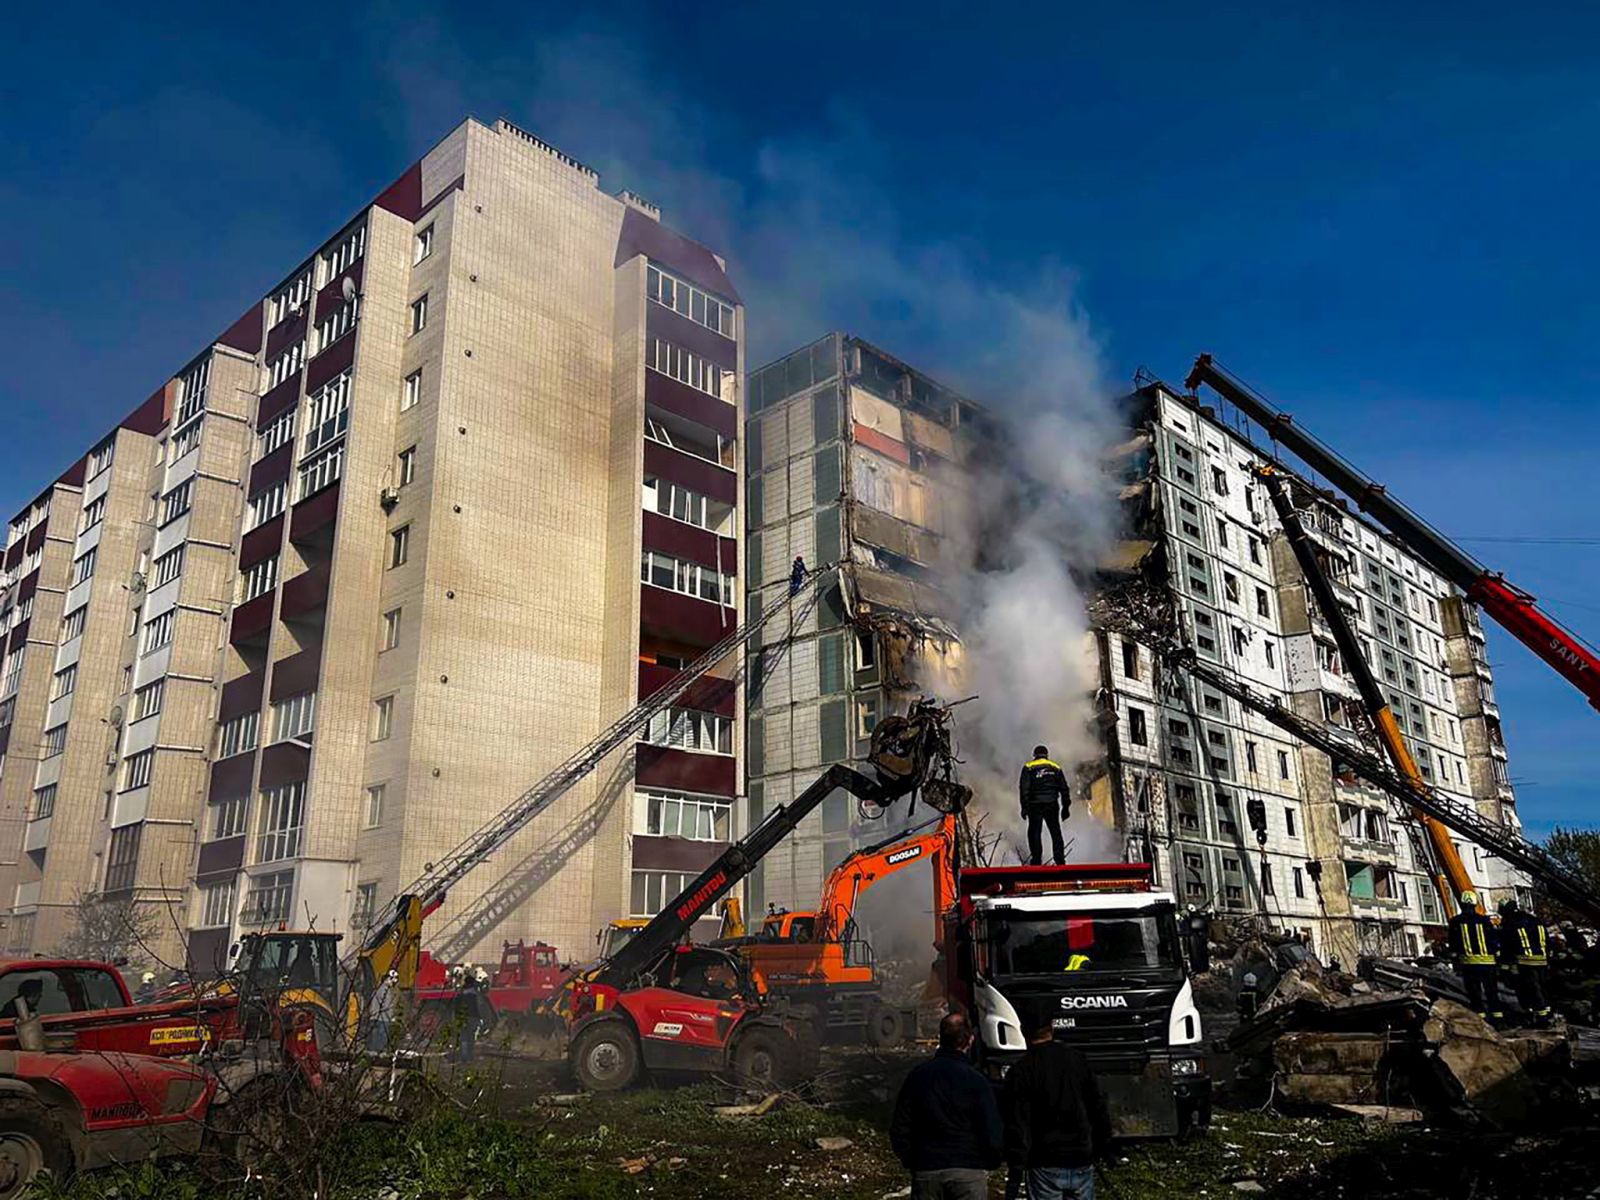 epa10595900 A handout photo released by Ukraine's Ministry of Internal Affairs (MIA) shows rescuers working at the site of a damaged residential building after a missile attack, in Uman, Cherkasy region, central Ukraine, 28 April 2023, amid Russia's invasion. Ukraine's Ministry of Internal Affairs said on 28 April, that the Russian army conducted attacks on residential buildings across the country, including Dnipro, Uman and Ukrainka in the Kyiv region, killing at least six people and injuring several others. Russian troops entered Ukrainian territory in February 2022, starting a conflict that has provoked destruction and a humanitarian crisis.  EPA/UKRAINE'S MINISTRY OF INTERNAL AFFAIRS HANDOUT -- BEST QUALITY AVAILABLE -- MANDATORY CREDIT -- HANDOUT EDITORIAL USE ONLY/NO SALES